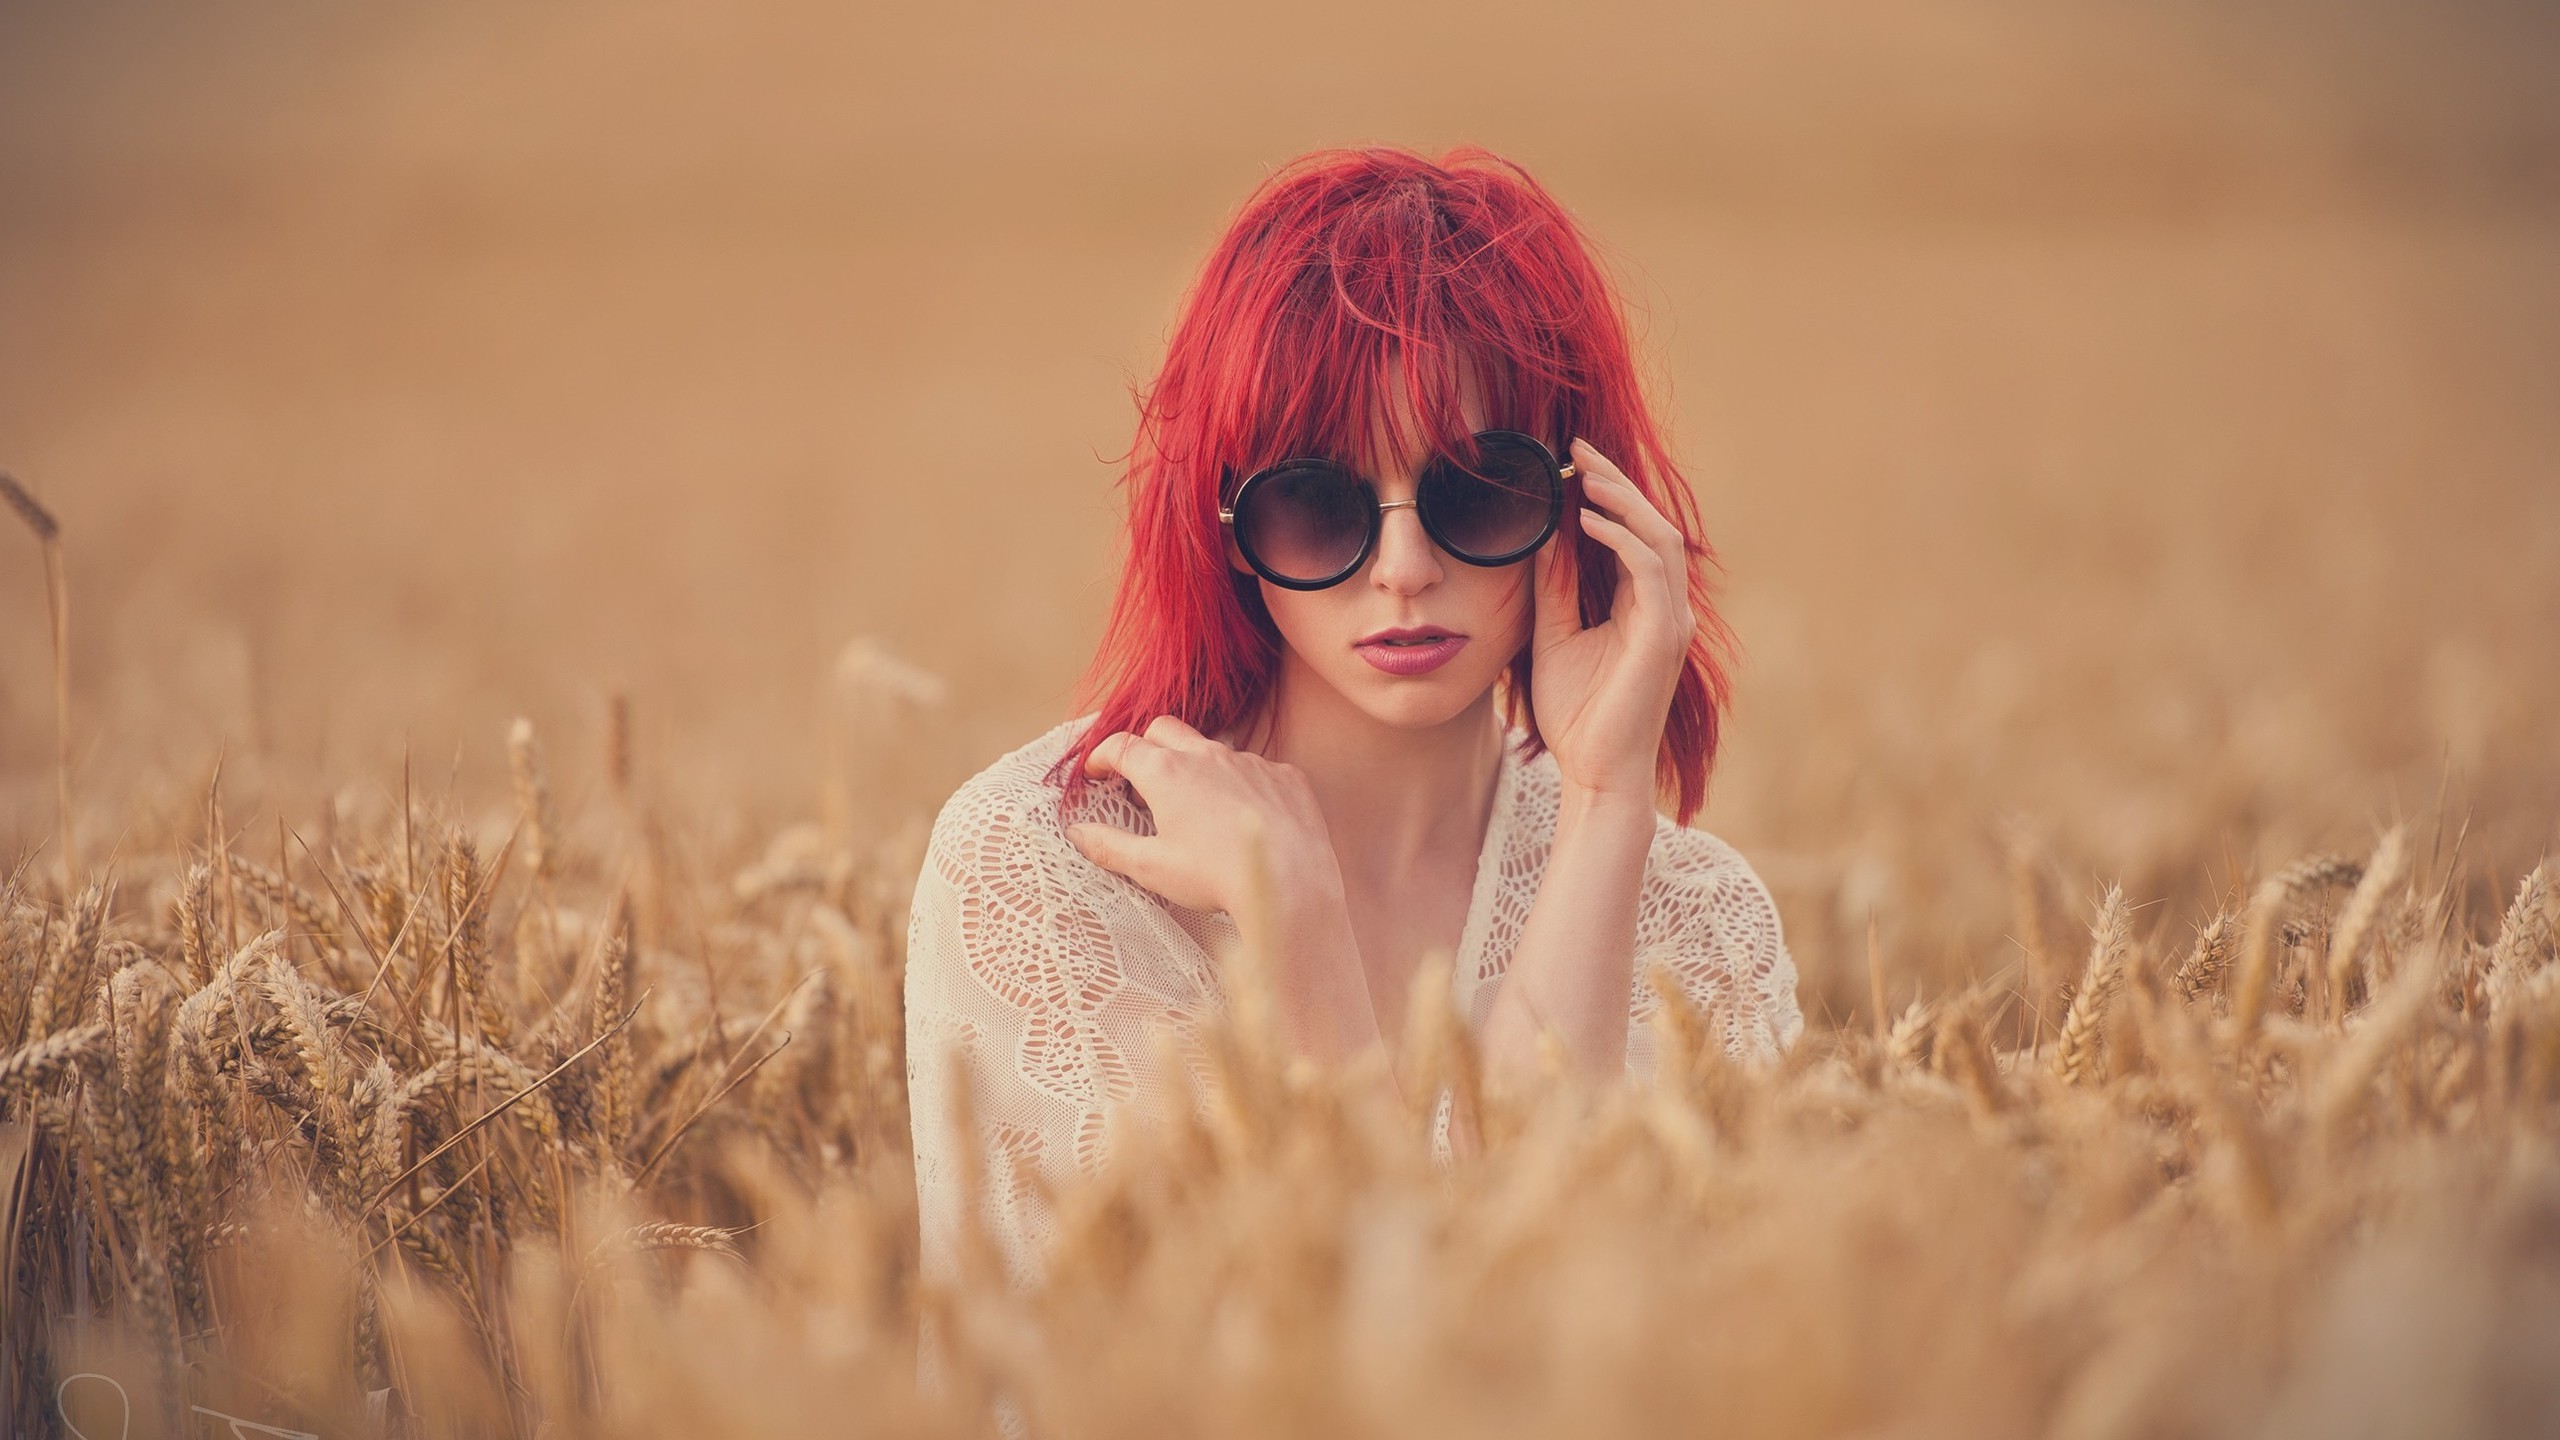 women, Model, Redhead, Long Hair, Women Outdoors, Face, See through Clothing, White Tops, Sunglasses, Women With Glasses, Nature, Field, Spikelets, Grain, Depth Of Field, Hand Wallpaper